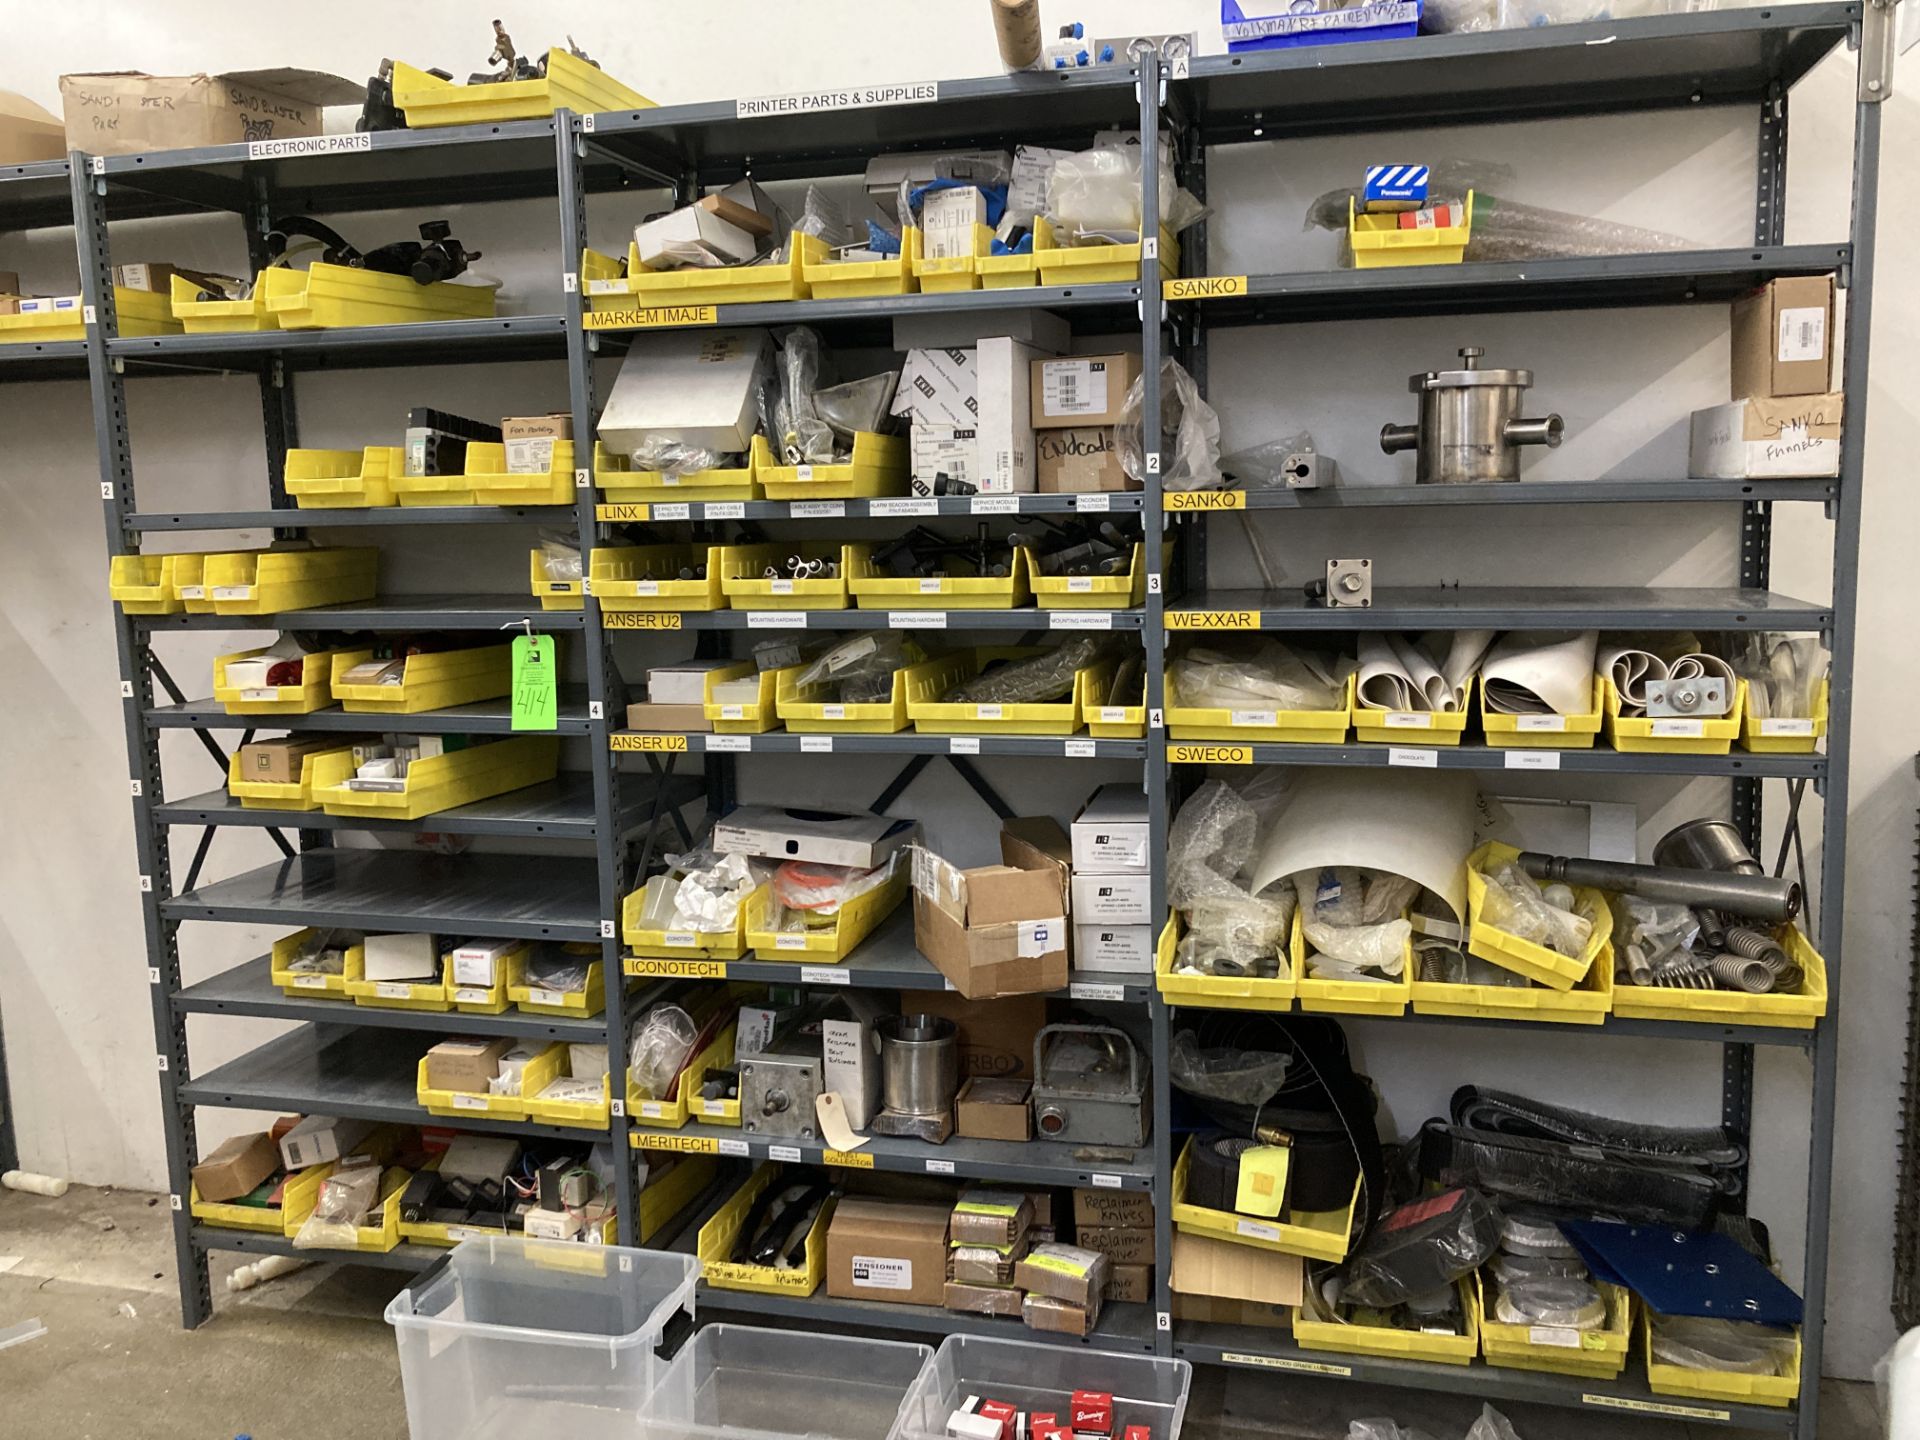 LOT OF shelf units and content on shelf Rigging Fee: $ 375